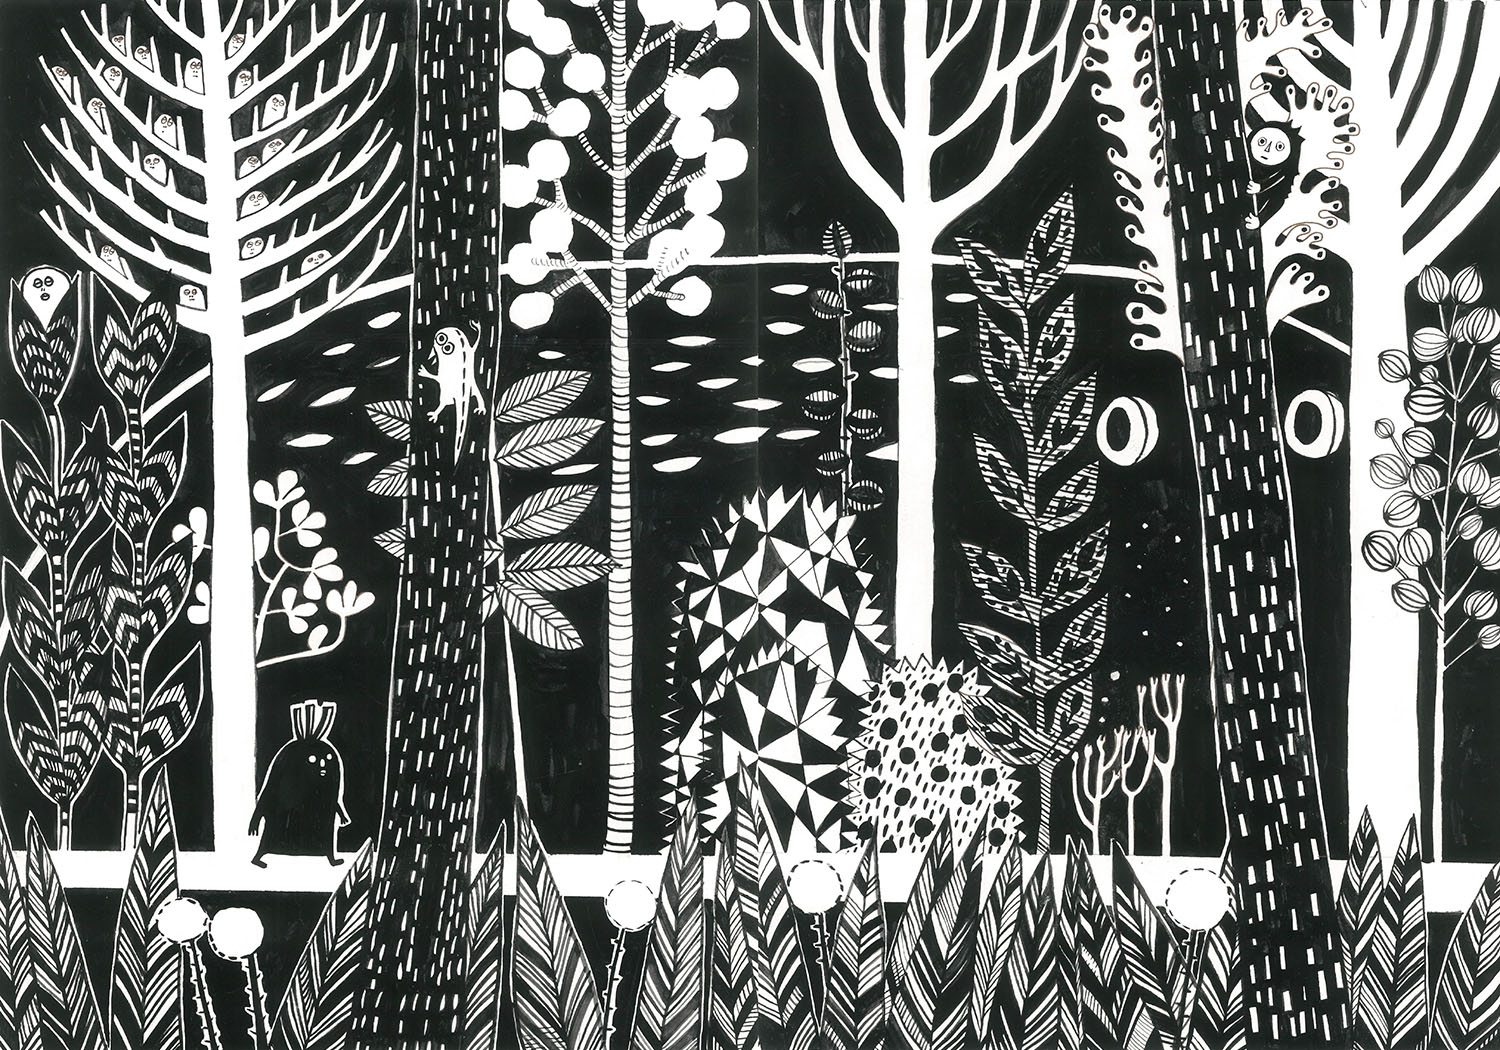 Black and white illustration from artists book of small creature in a wood with plants